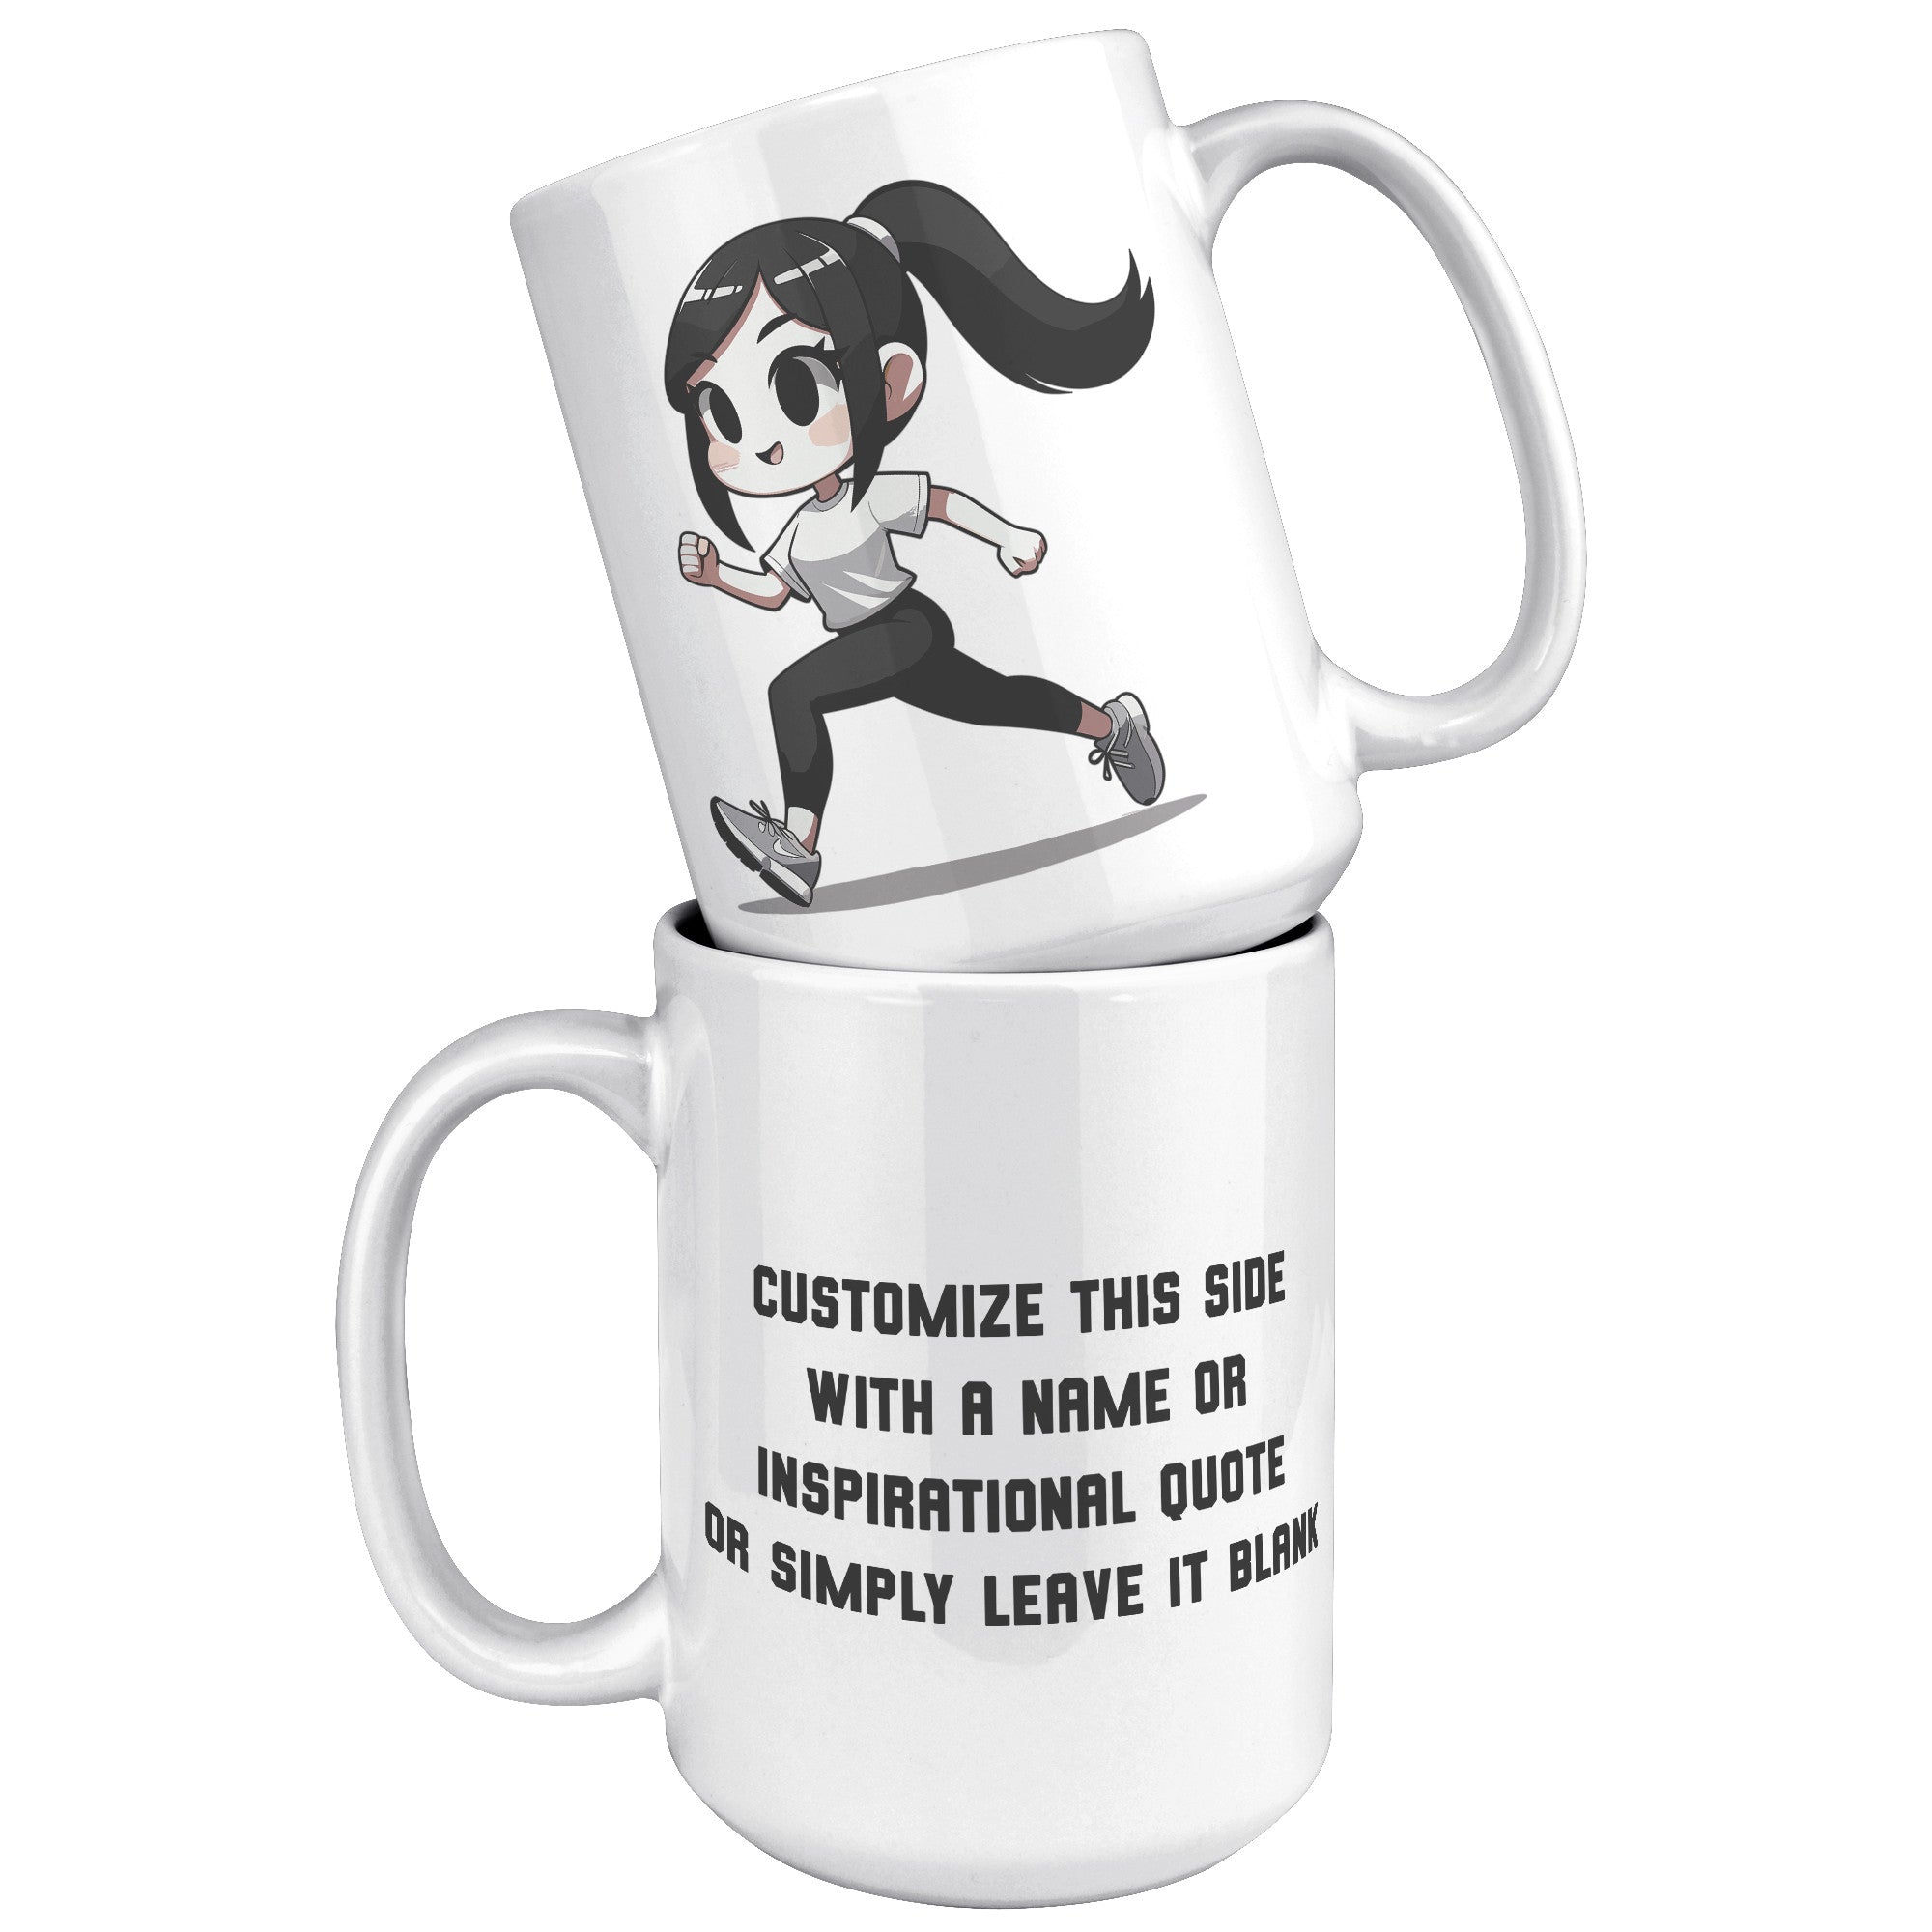 "Female Runner Coffee Mug - Inspirational Running Quotes Cup - Perfect Gift for Women Runners - Motivational Marathoner's Morning Brew" - F1